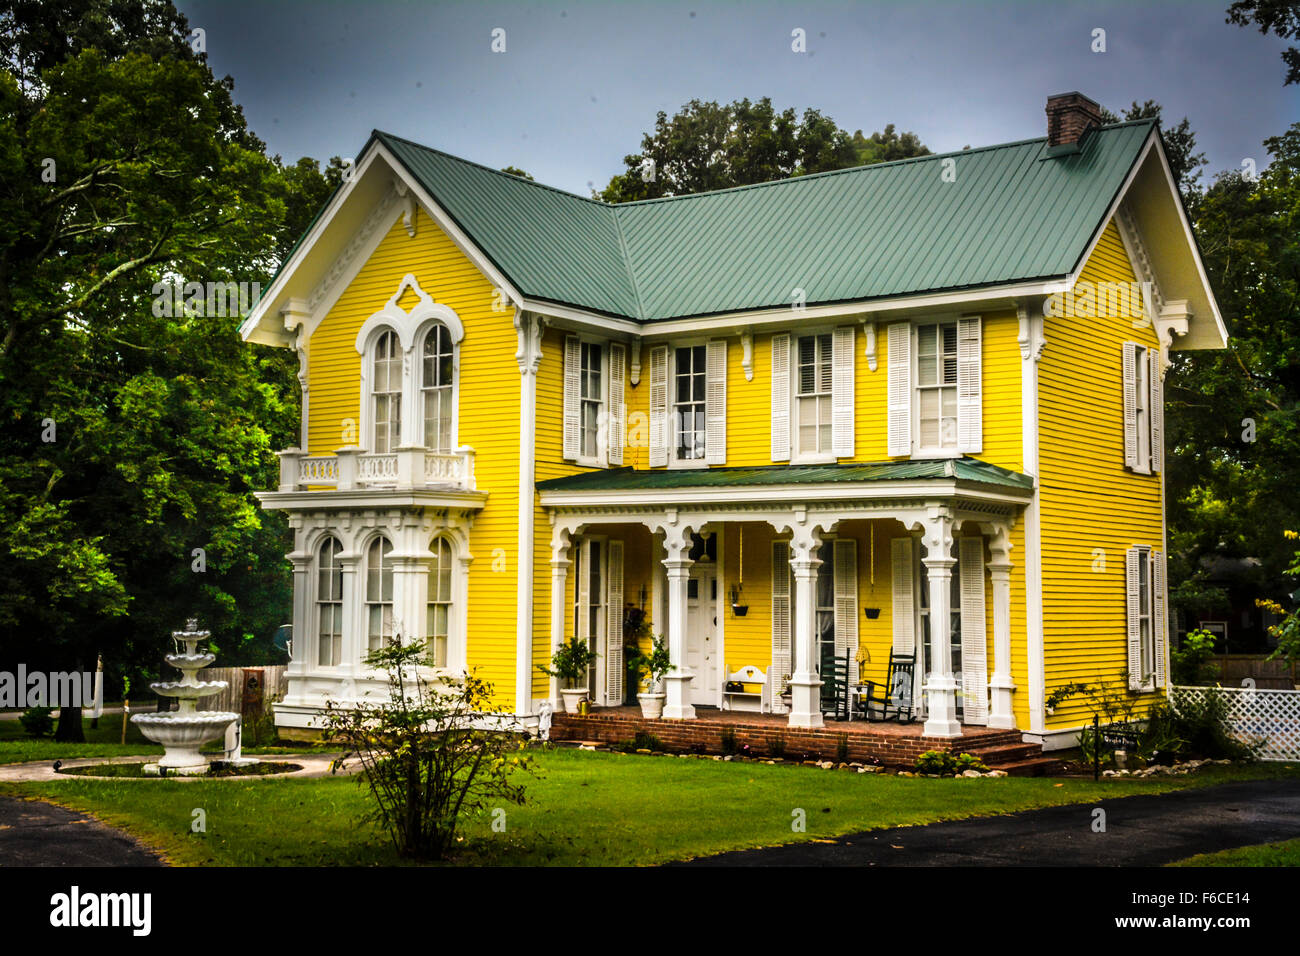 The Wright House, a fanciful two storied Yellow Victorian house built in 1867 accented with gingerbread style in Bolivar, TN Stock Photo